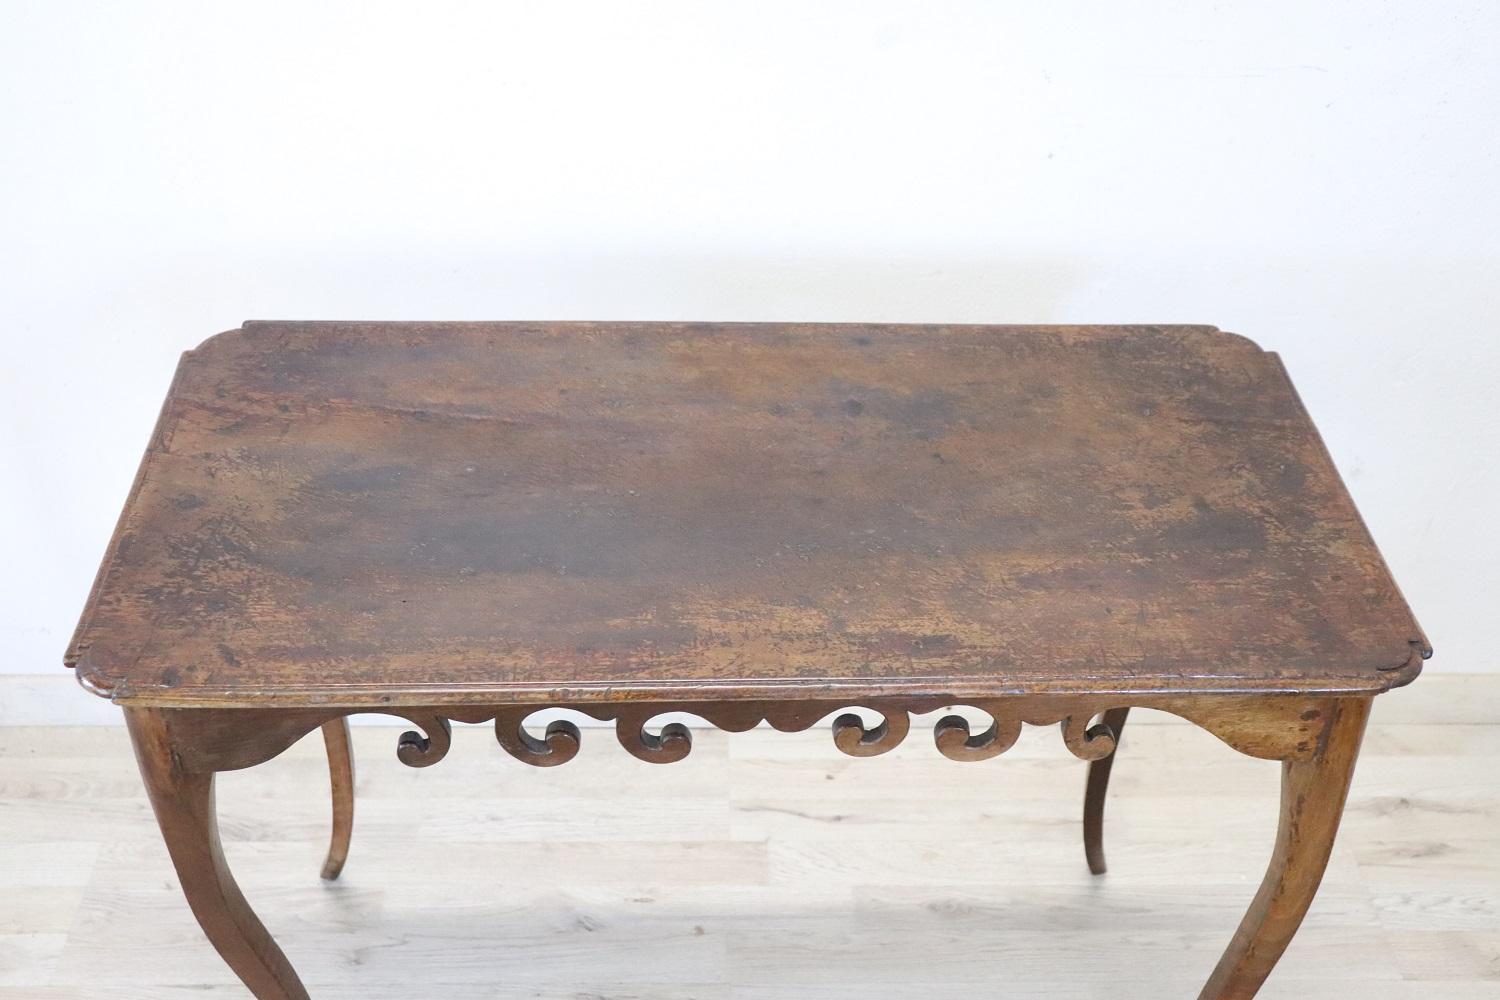 Lovely italian of the period Louis XV walnut side table. Featuring legs with refined turned decoration. The table is characterized by elegant long and wavy legs. Under the top there is a beautiful decoration with scrolls. This beautiful table can be